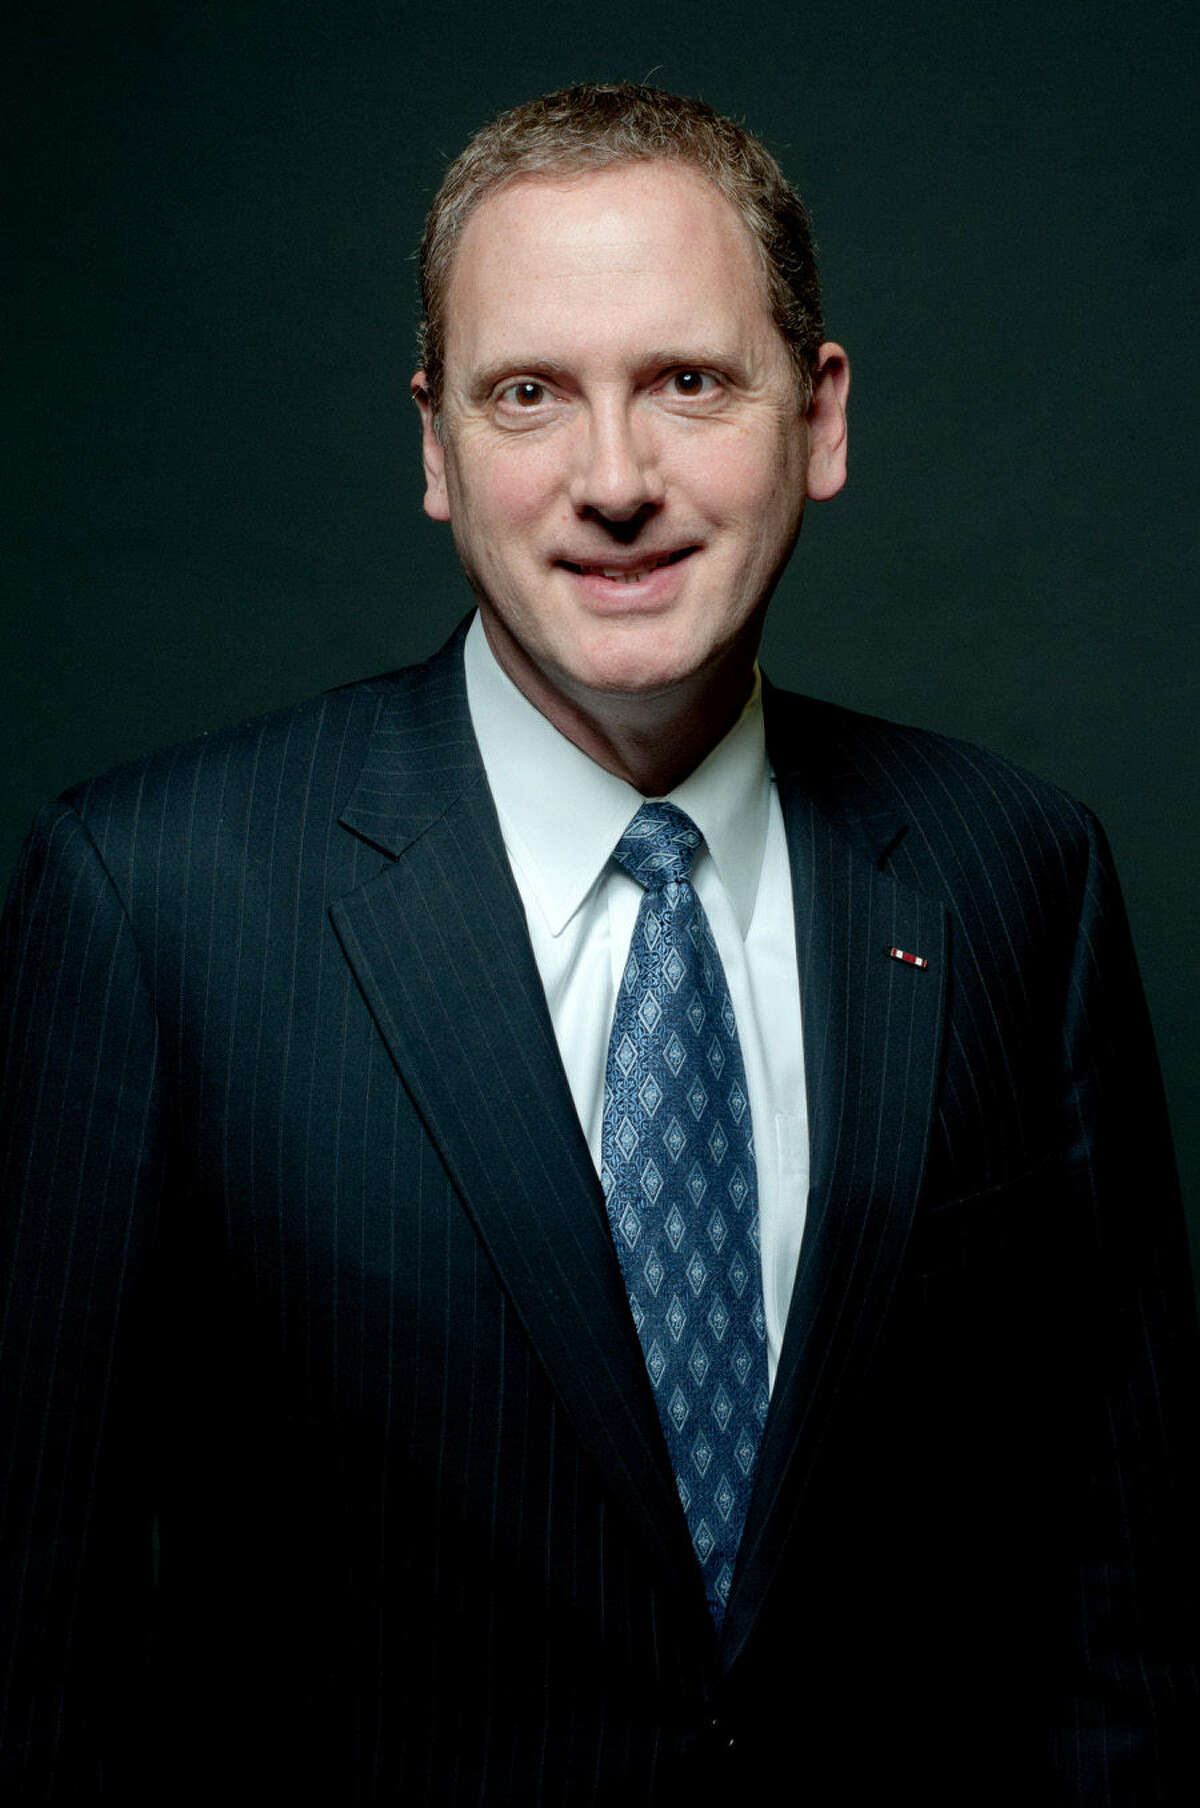 Chuck DeVore, vice president for policy at the Texas Public Policy Foundation